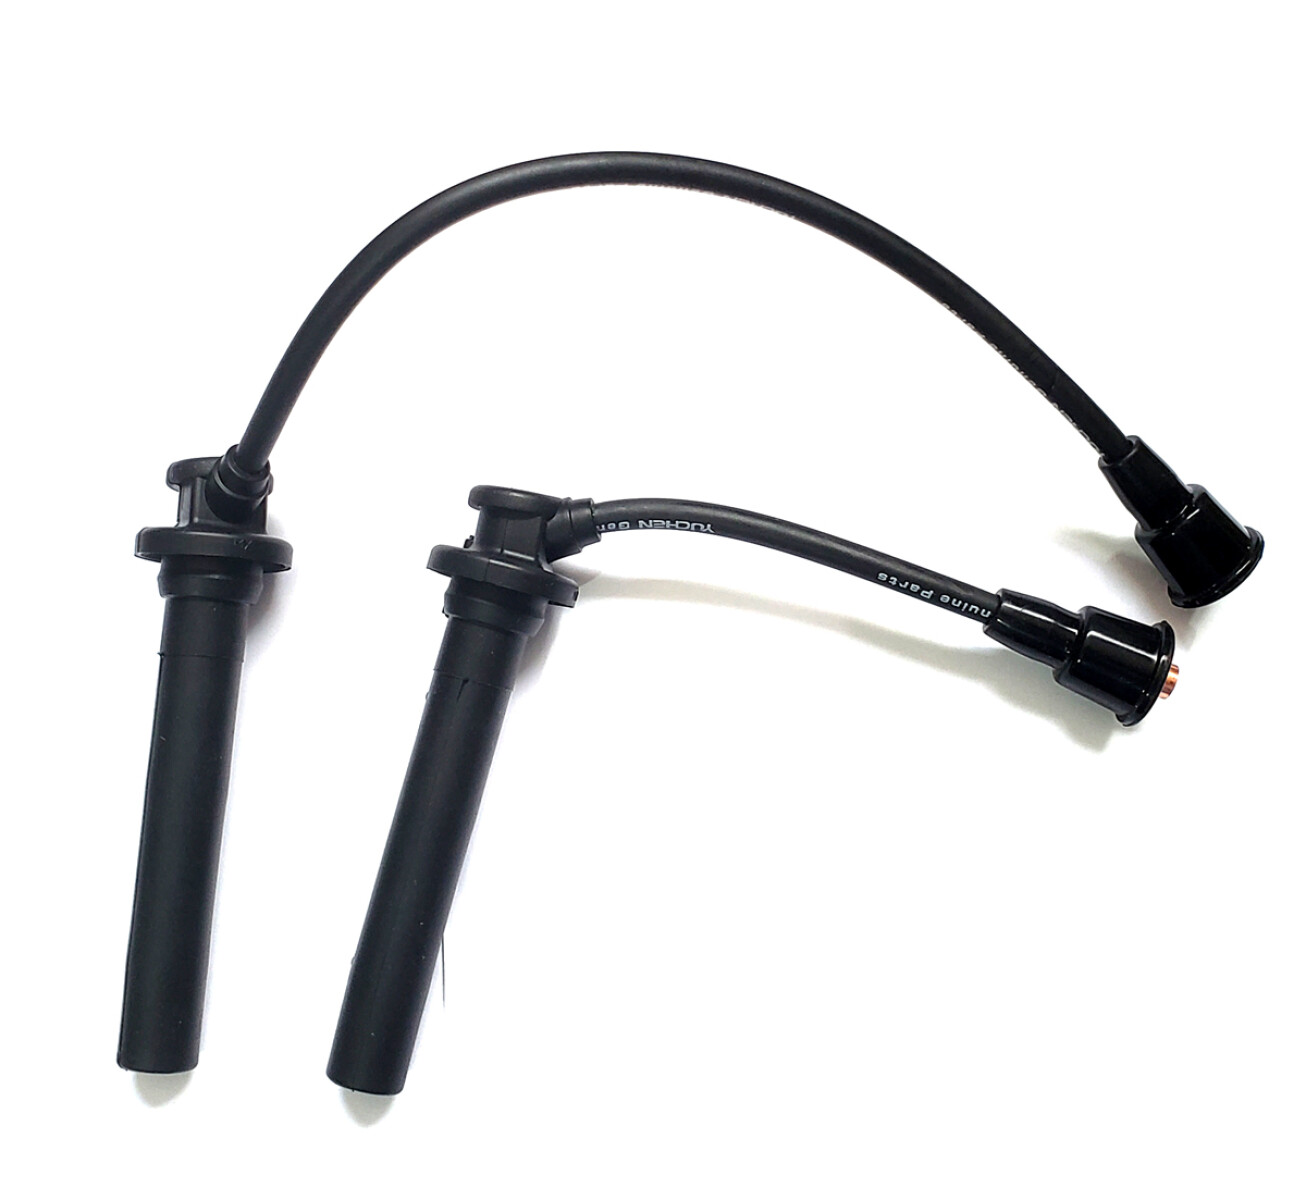 CABLE BUJIA DFM DFSK JGO. CABLE BUJIA DFSK SERIE V (2 CABLES) - 